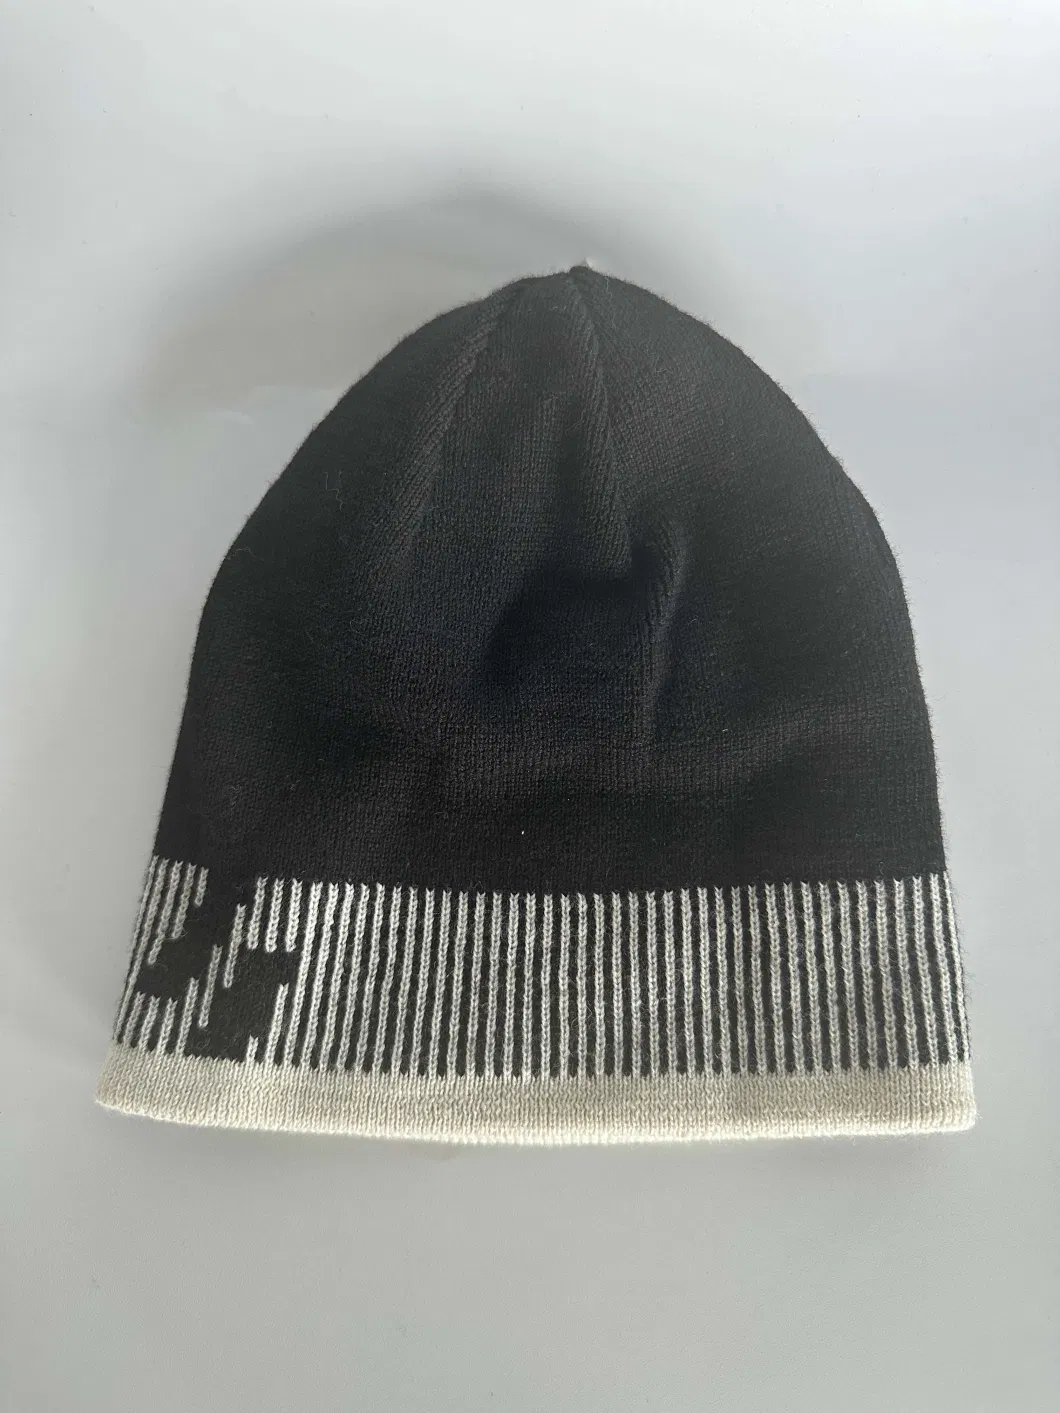 Hold Plus Winter Sports Series Beanie Acrylic Warm Hat for Unisex